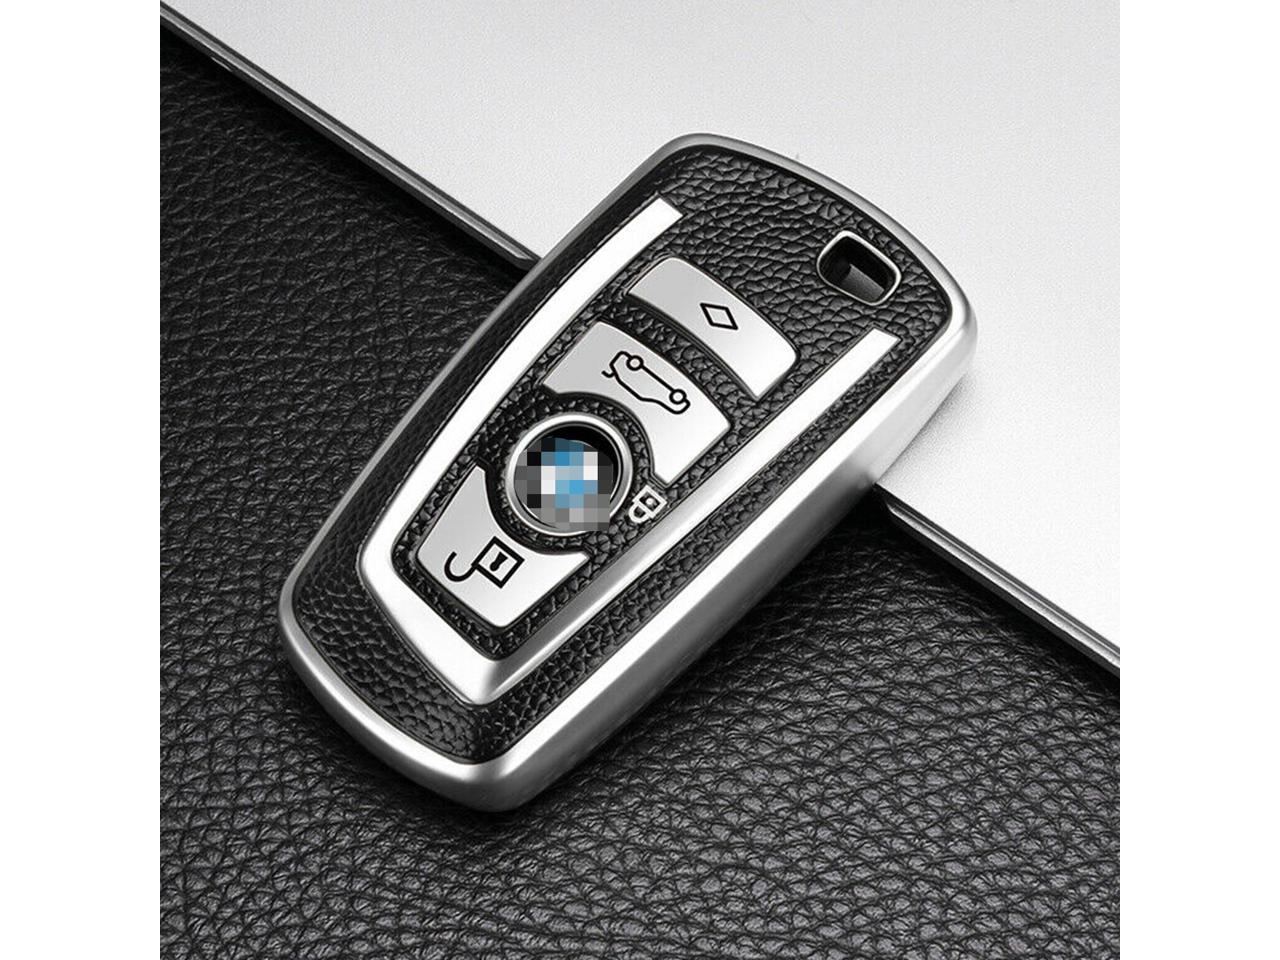 Real leather Keyless Smart Key Case Cover Trim for part of BMW F10 F20 F30 F13 F01 F25 3 or 4 buttons 1 3 5 7 series Be sure check key shape and our pictures before you buy 